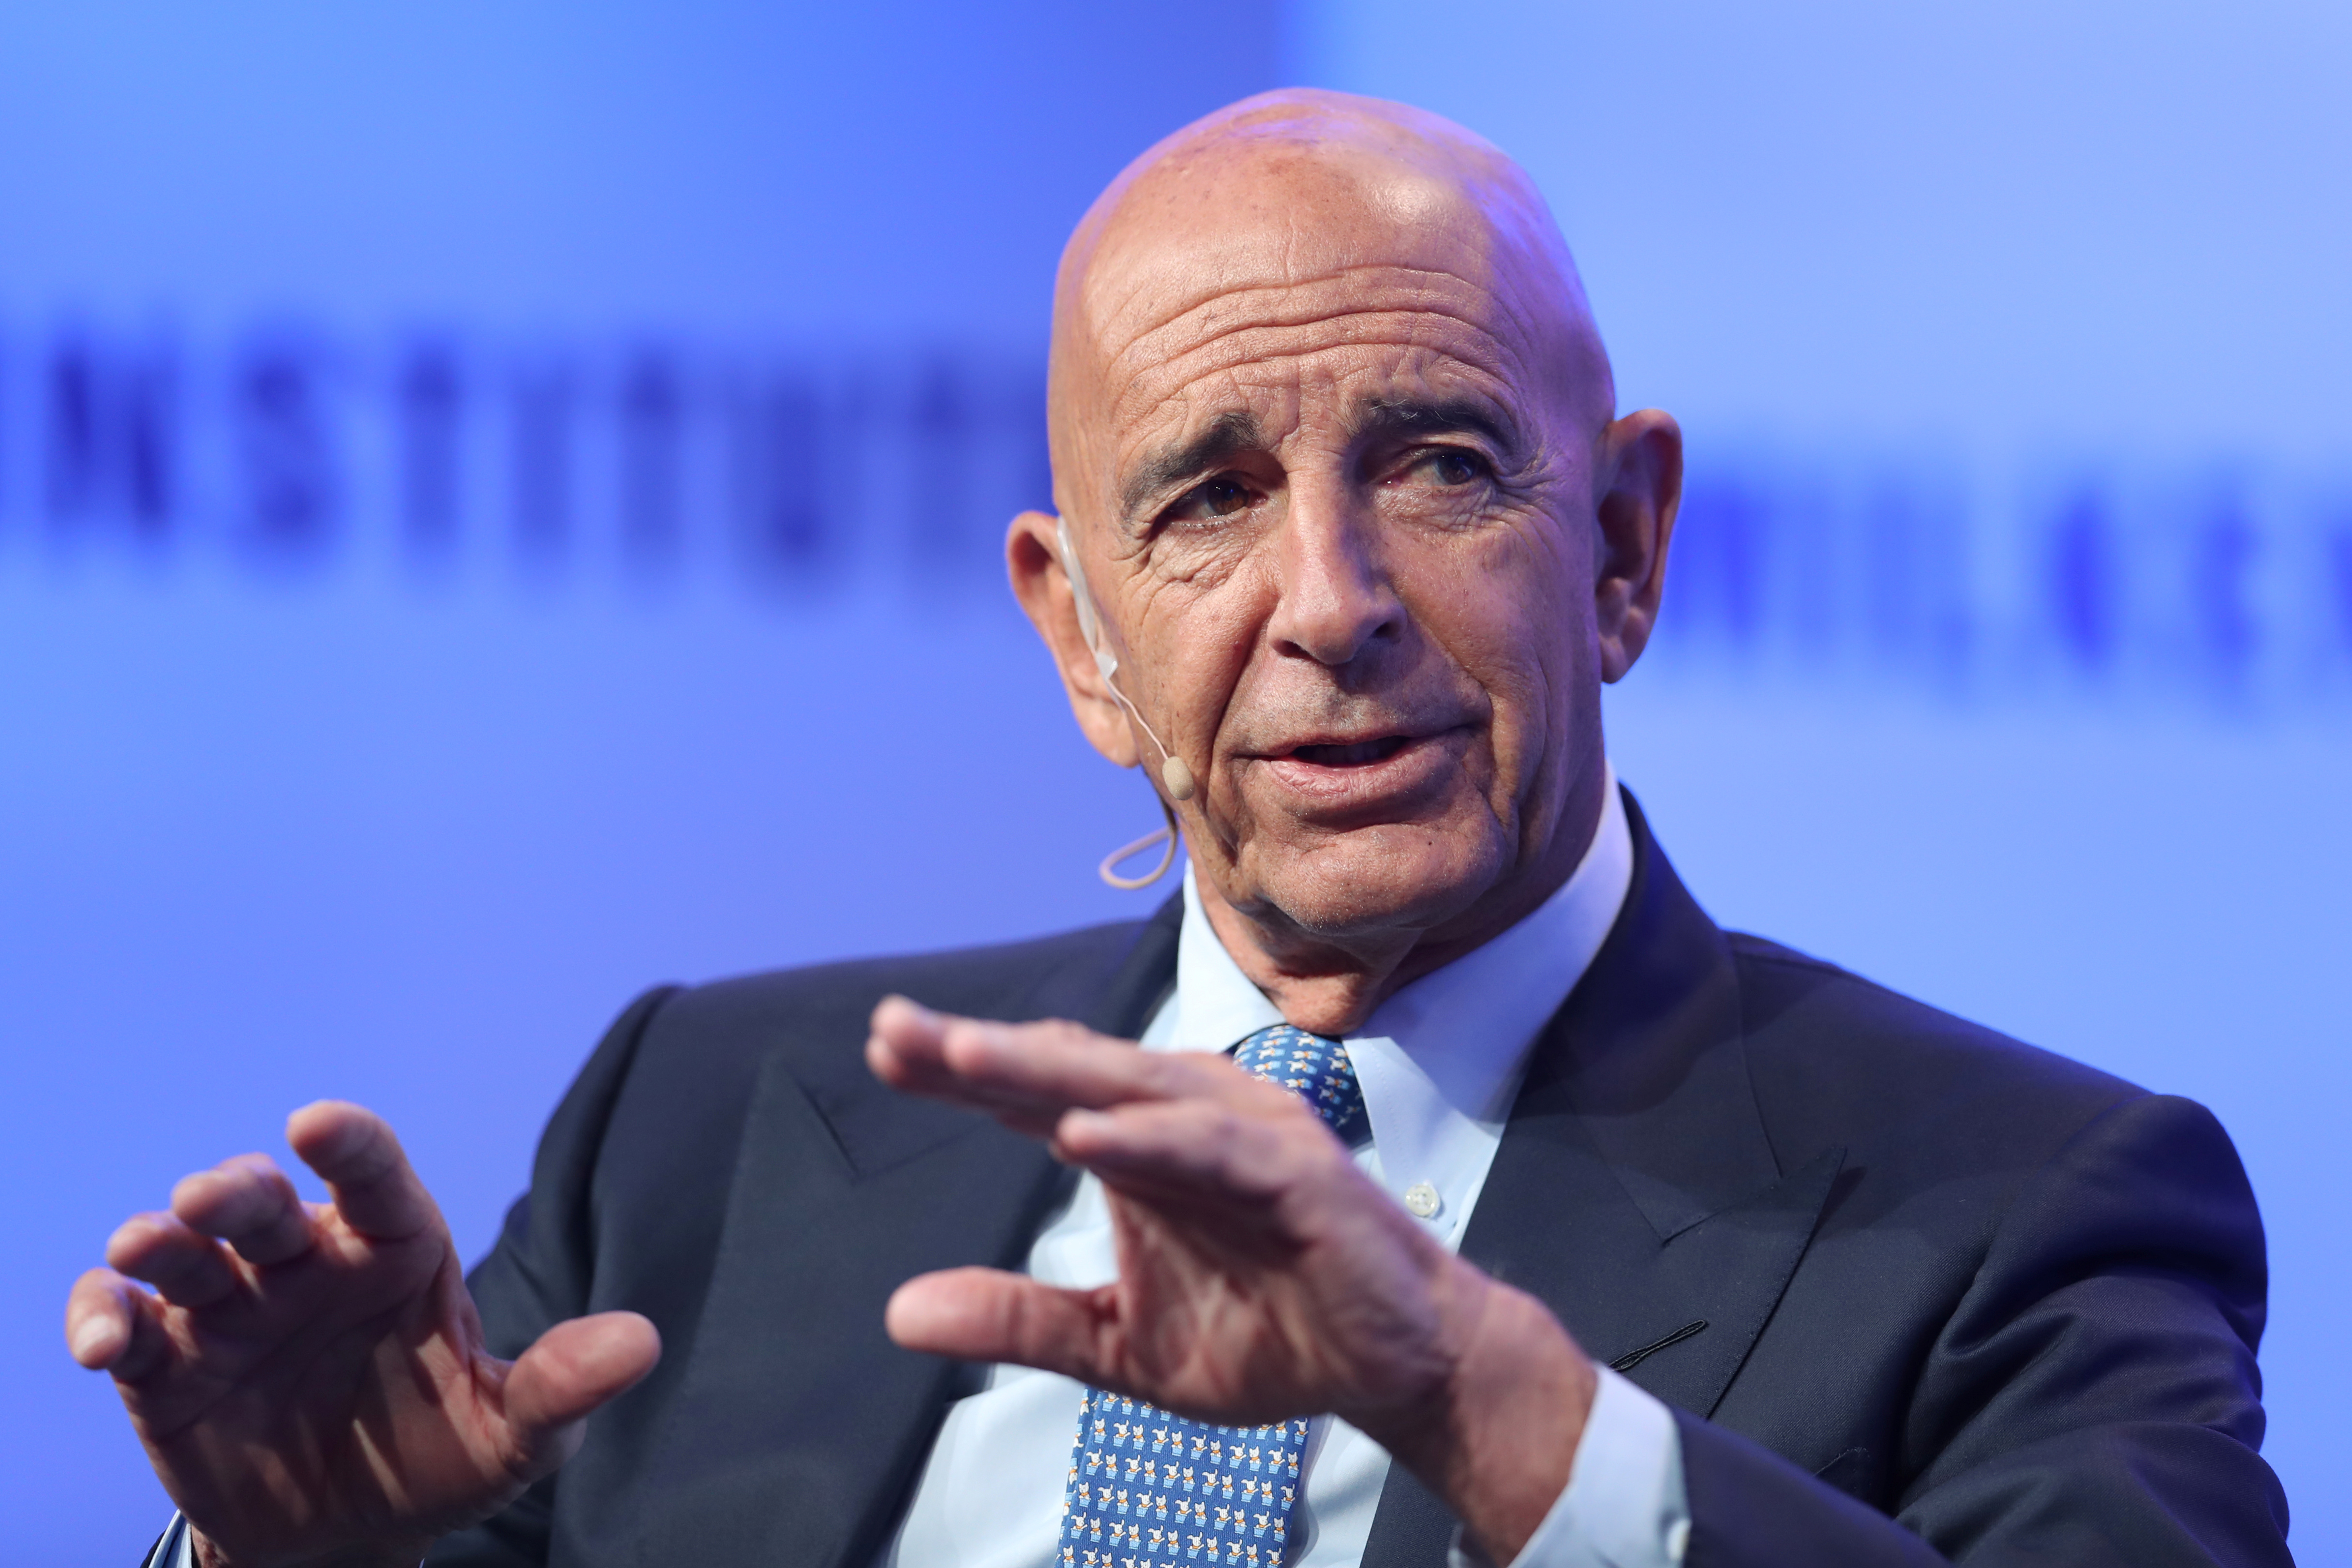 Thomas Barrack, Executive Chairman, Colony Northstar, speaks at the Milken Institute's 21st Global Conference in Beverly Hills